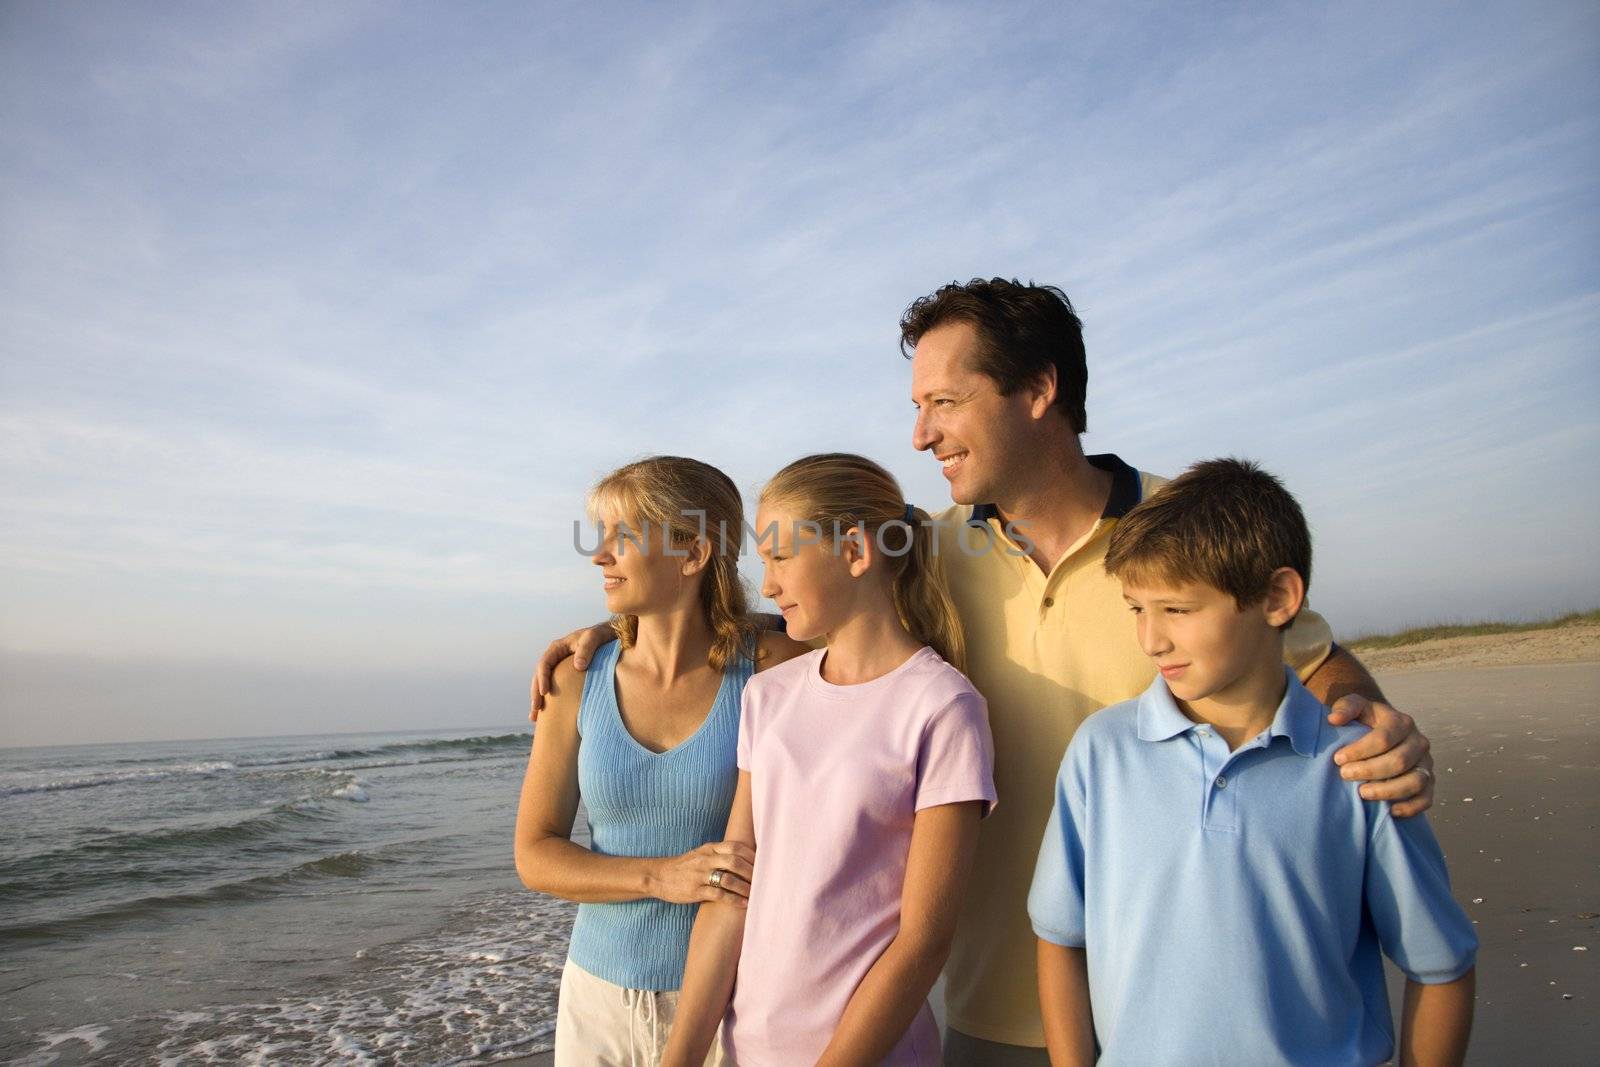 Portrait of Caucasian family of four posing on beach looking at ocean.